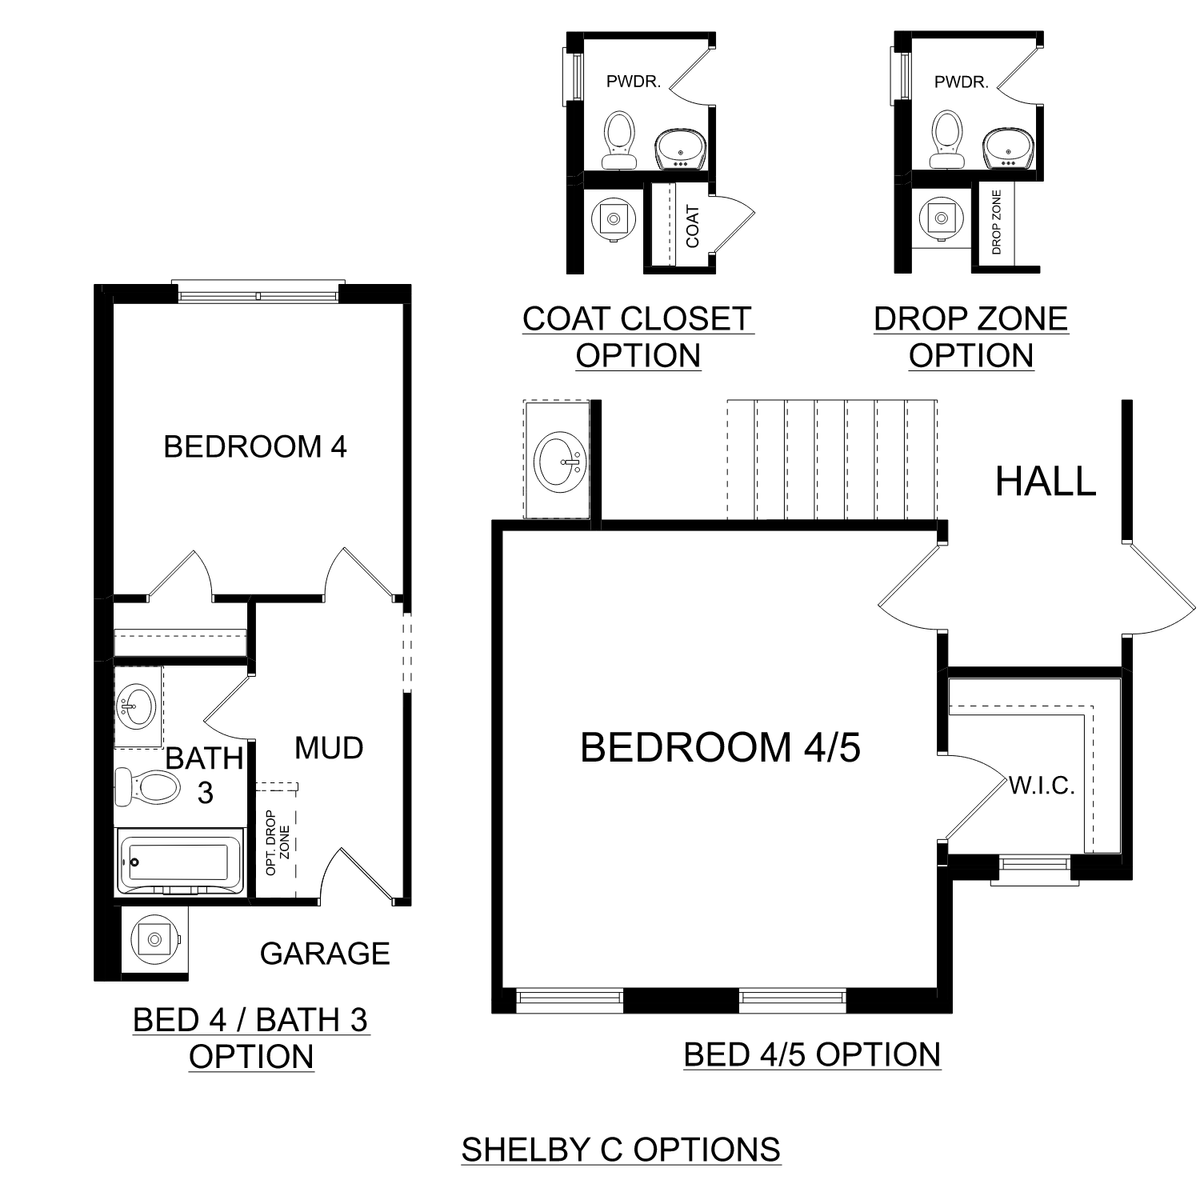 3 - The Shelby C buildable floor plan layout in Davidson Homes' Cain Park community.